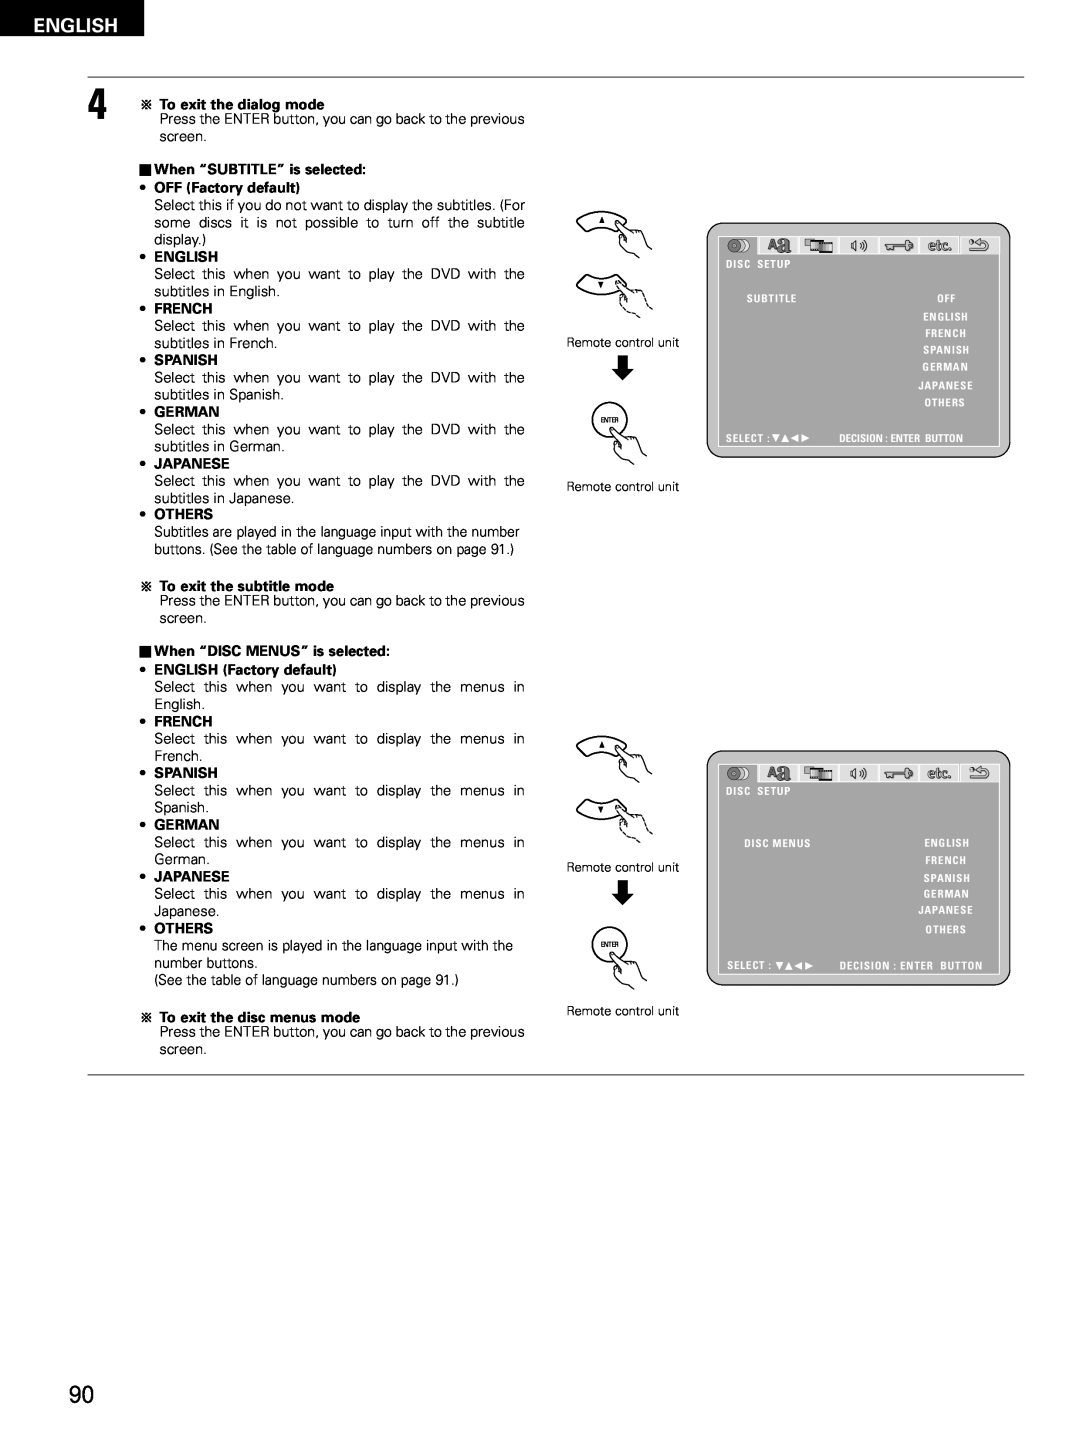 Denon D-M51DVS, ADVM51 manual To exit the dialog mode, 2When “SUBTITLE” is selected, • OFF Factory default, • English 